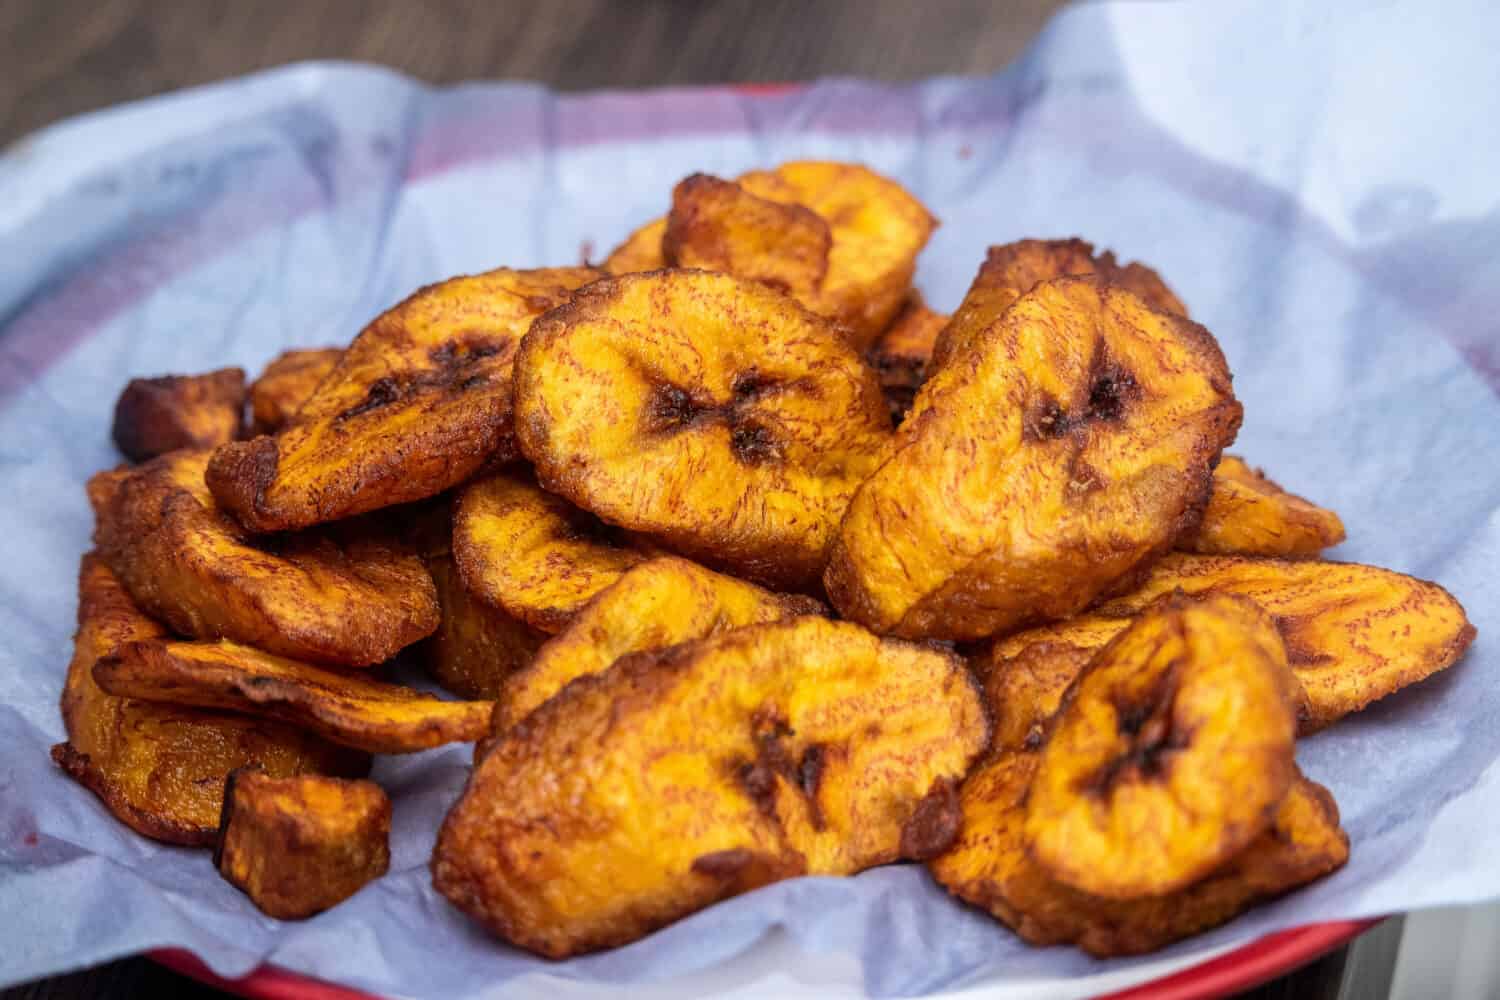 Ripe fried African plantain - local staple food served as meals with sauce or as a side dish in Nigeria, West Africa and other African countries. Deep Fried Nigerian Plantains ready to be served.